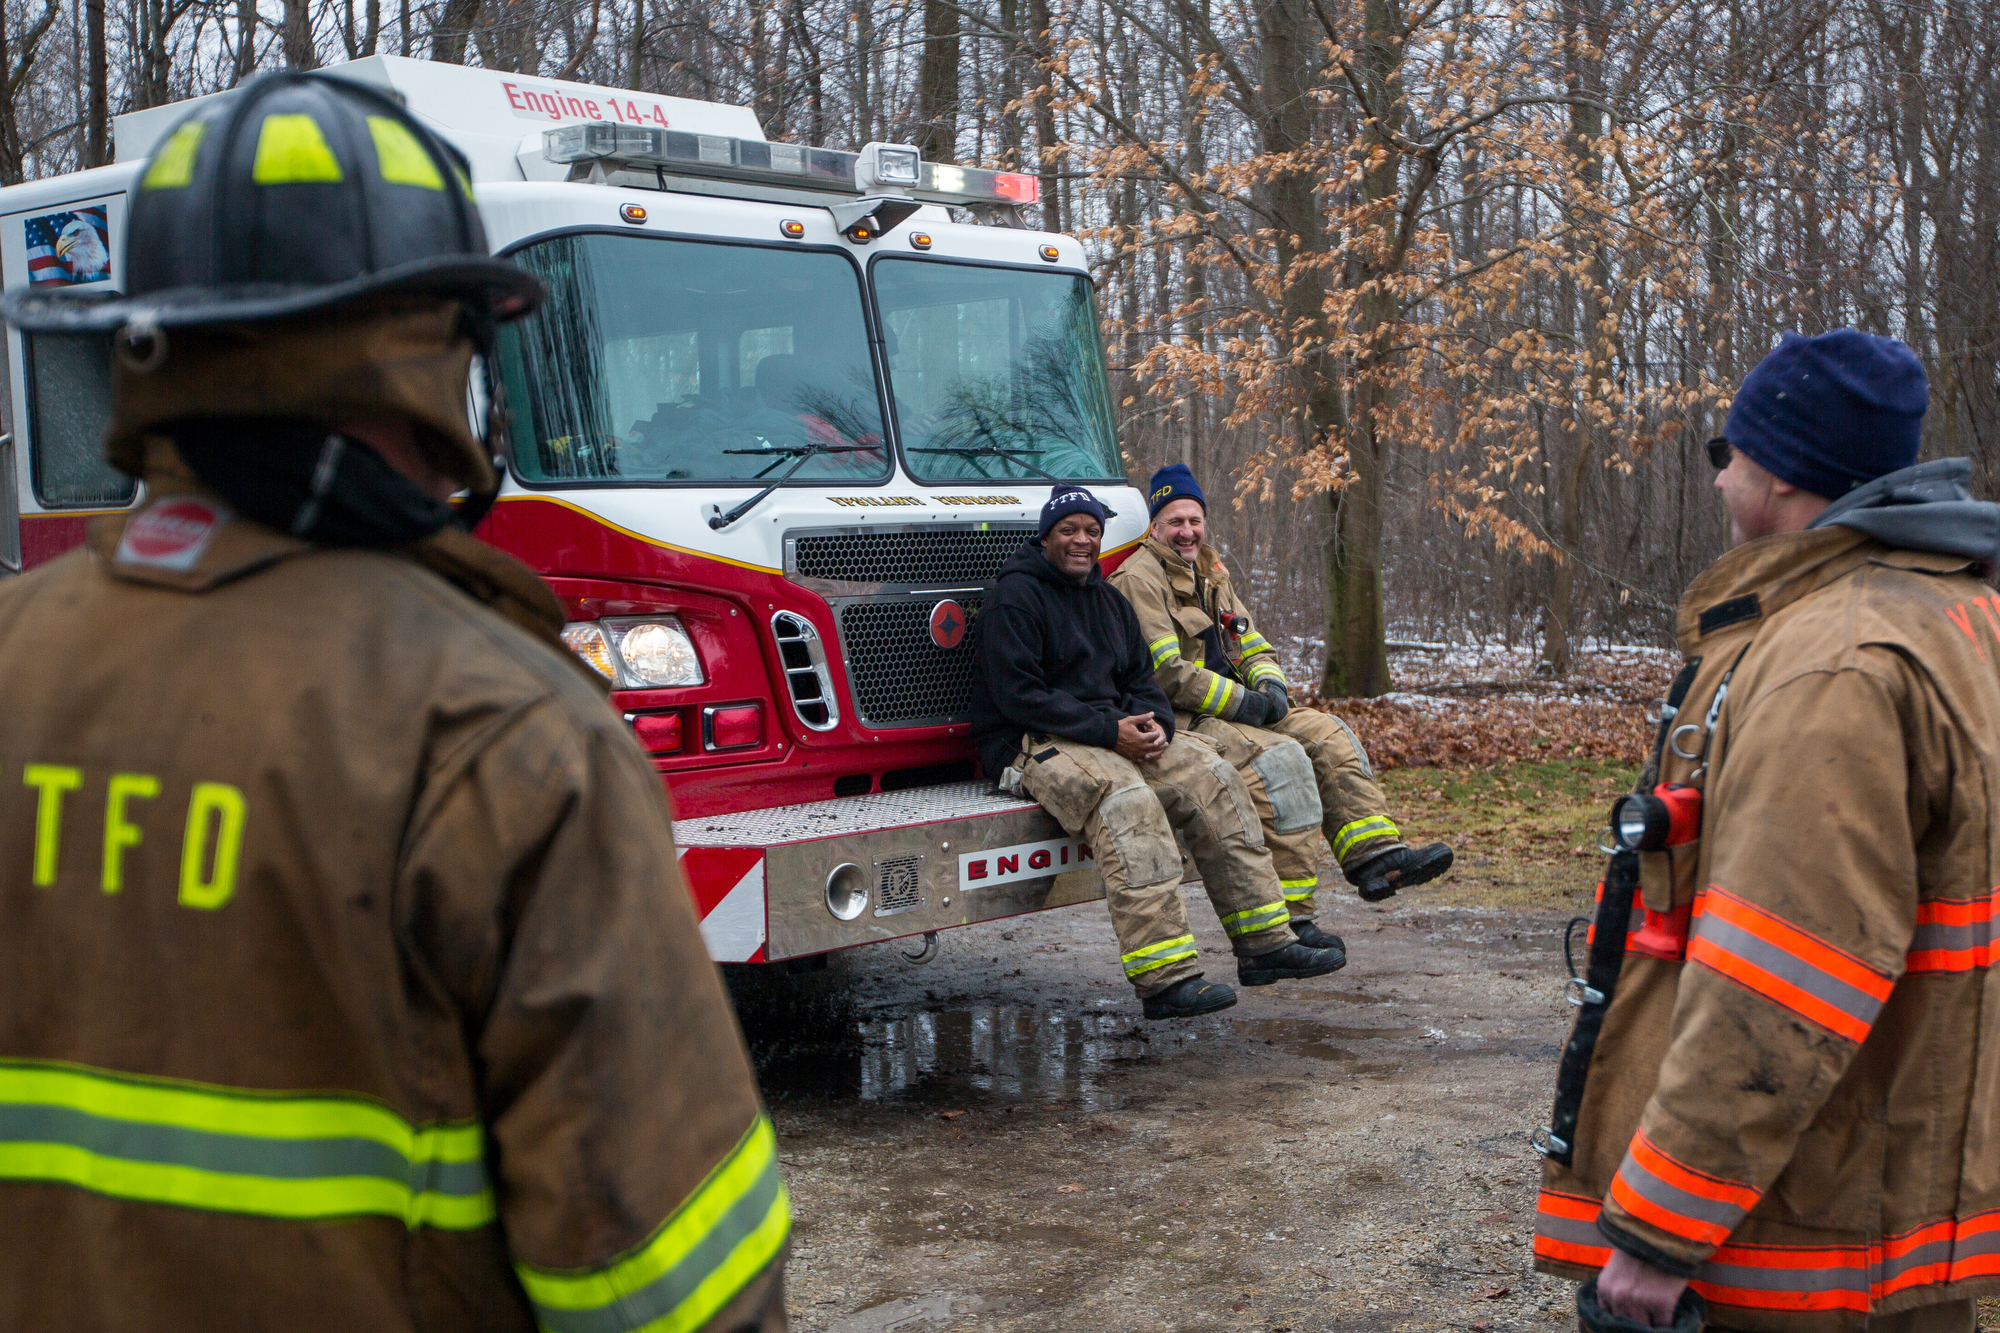  Two members of the Ypsilanti Township Fire Department sit on the front bumper of a fire truck after extinguishing a house fire at 9525 East Bemis Road in Ypsilanti Township on Sunday, January 29, 2017. The fire, which is still under investigation, w